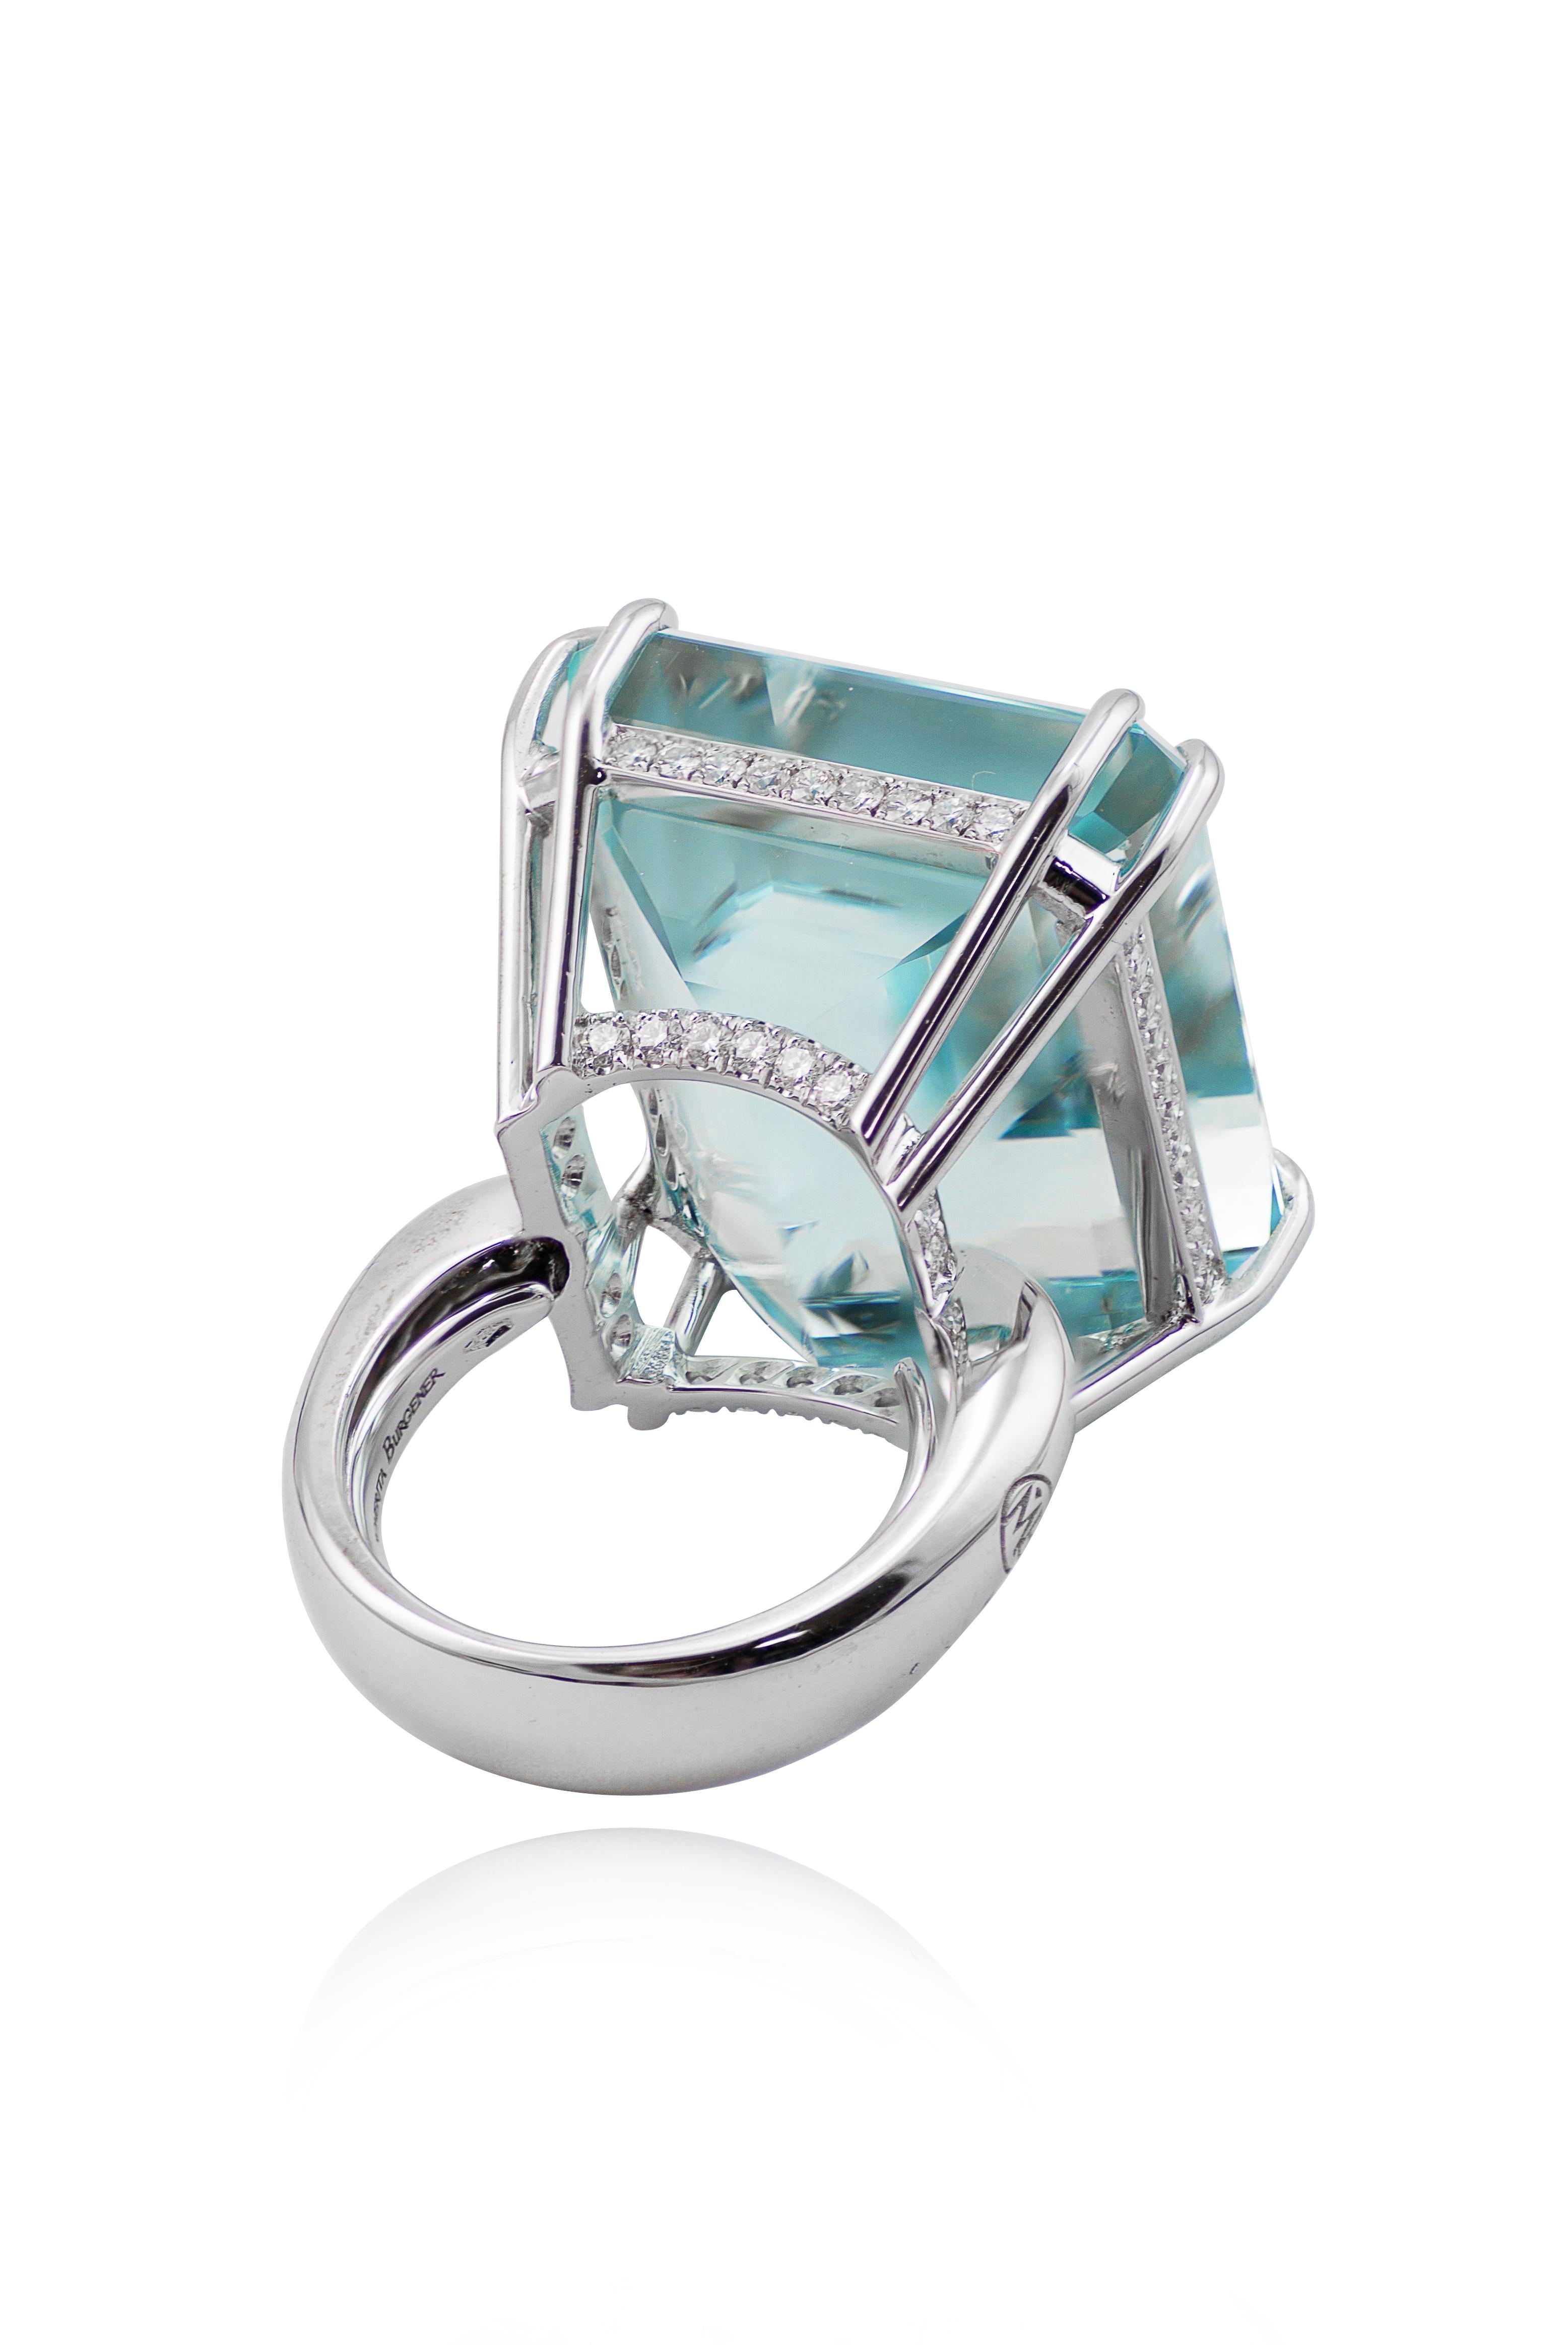 Octagon Cut Aquamarine Diamond 18 KT White Gold Made in Italy Cocktail Ring For Sale